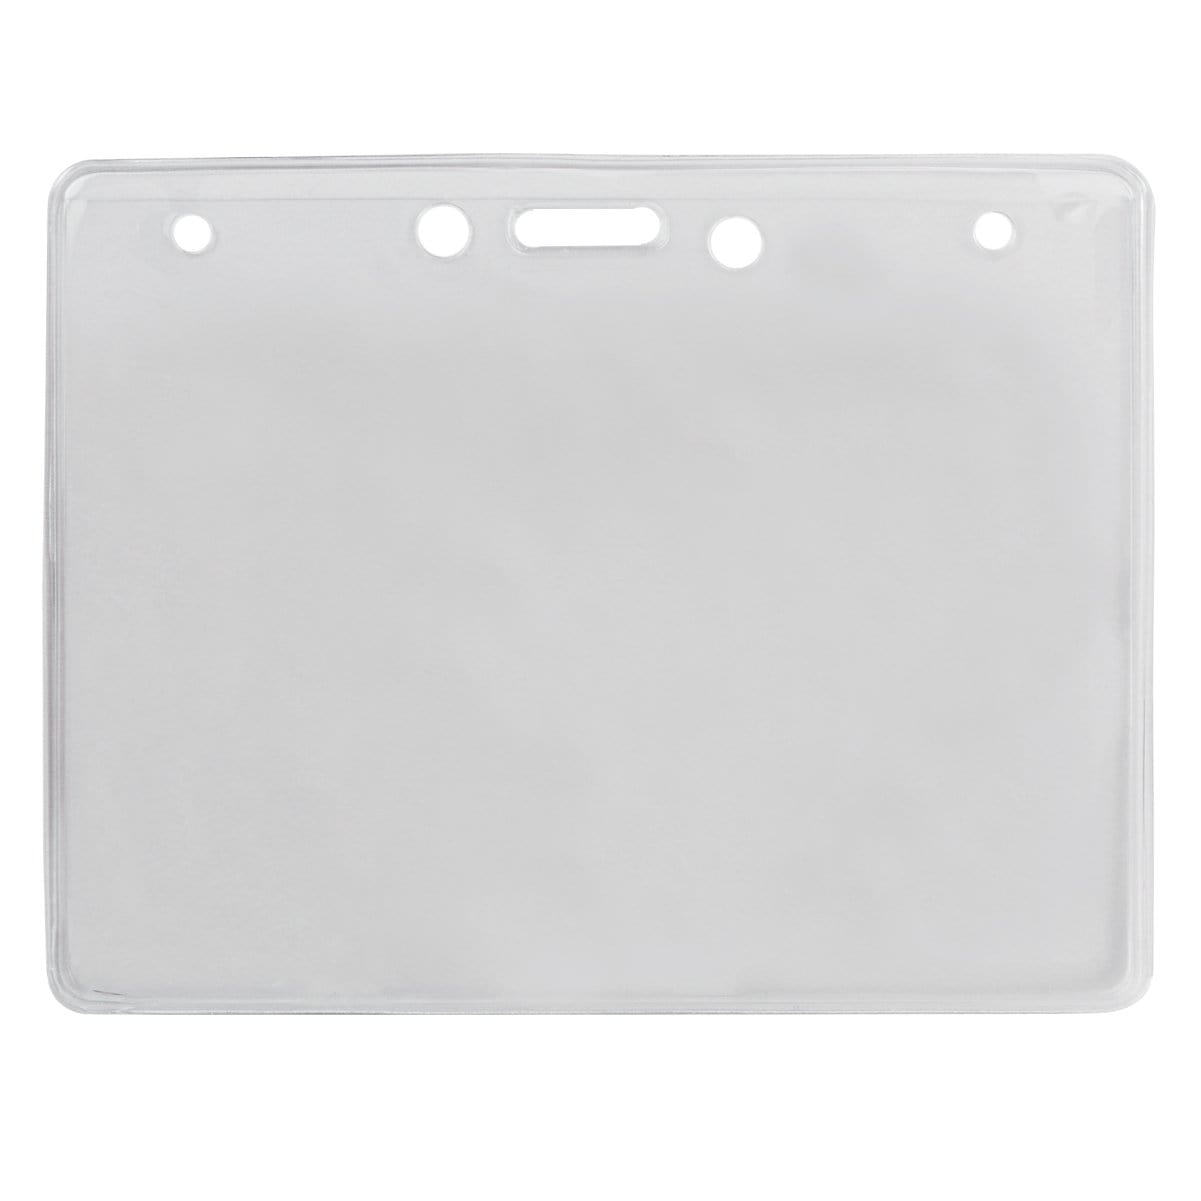 Economical 4 x 3 Horizontal Badge Holder - Clear Vinyl 4x3 Card Holder with Lanyard Slot & Chain Holes